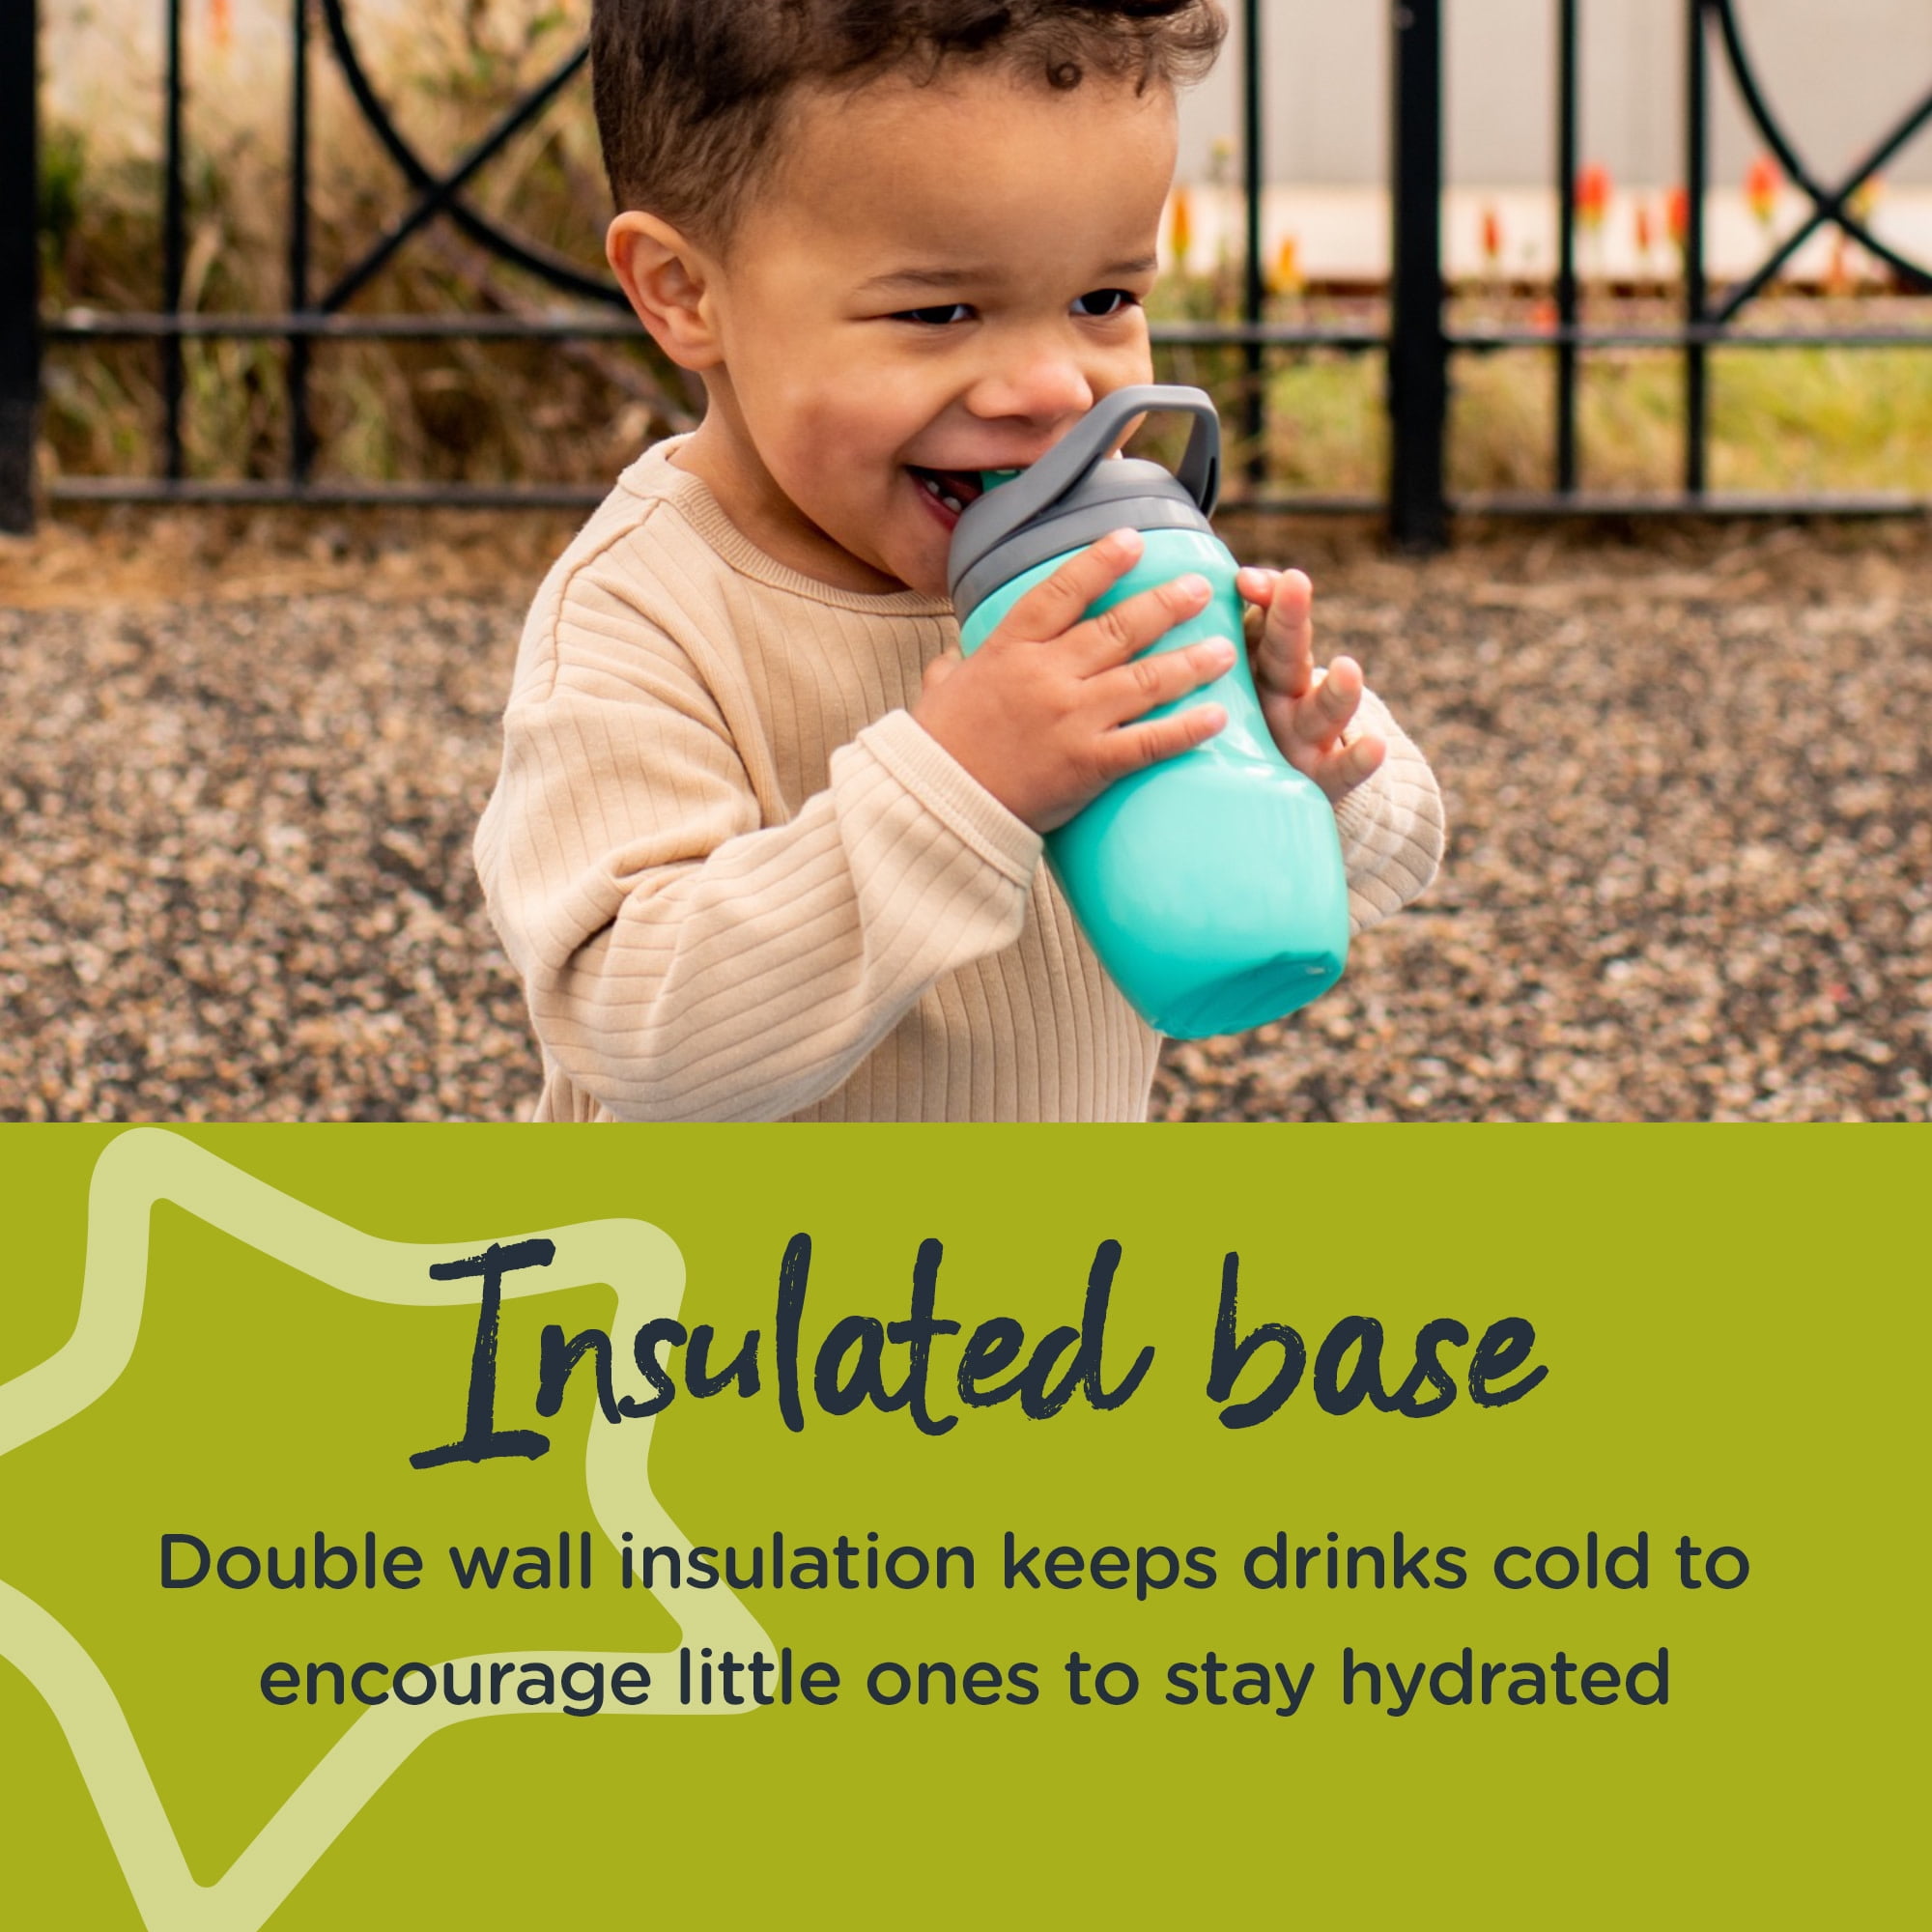 Tommee Tippee Sportee Water Bottle for Toddlers, Spill-Proof, Playful and  Colorful Designs, Easy to …See more Tommee Tippee Sportee Water Bottle for